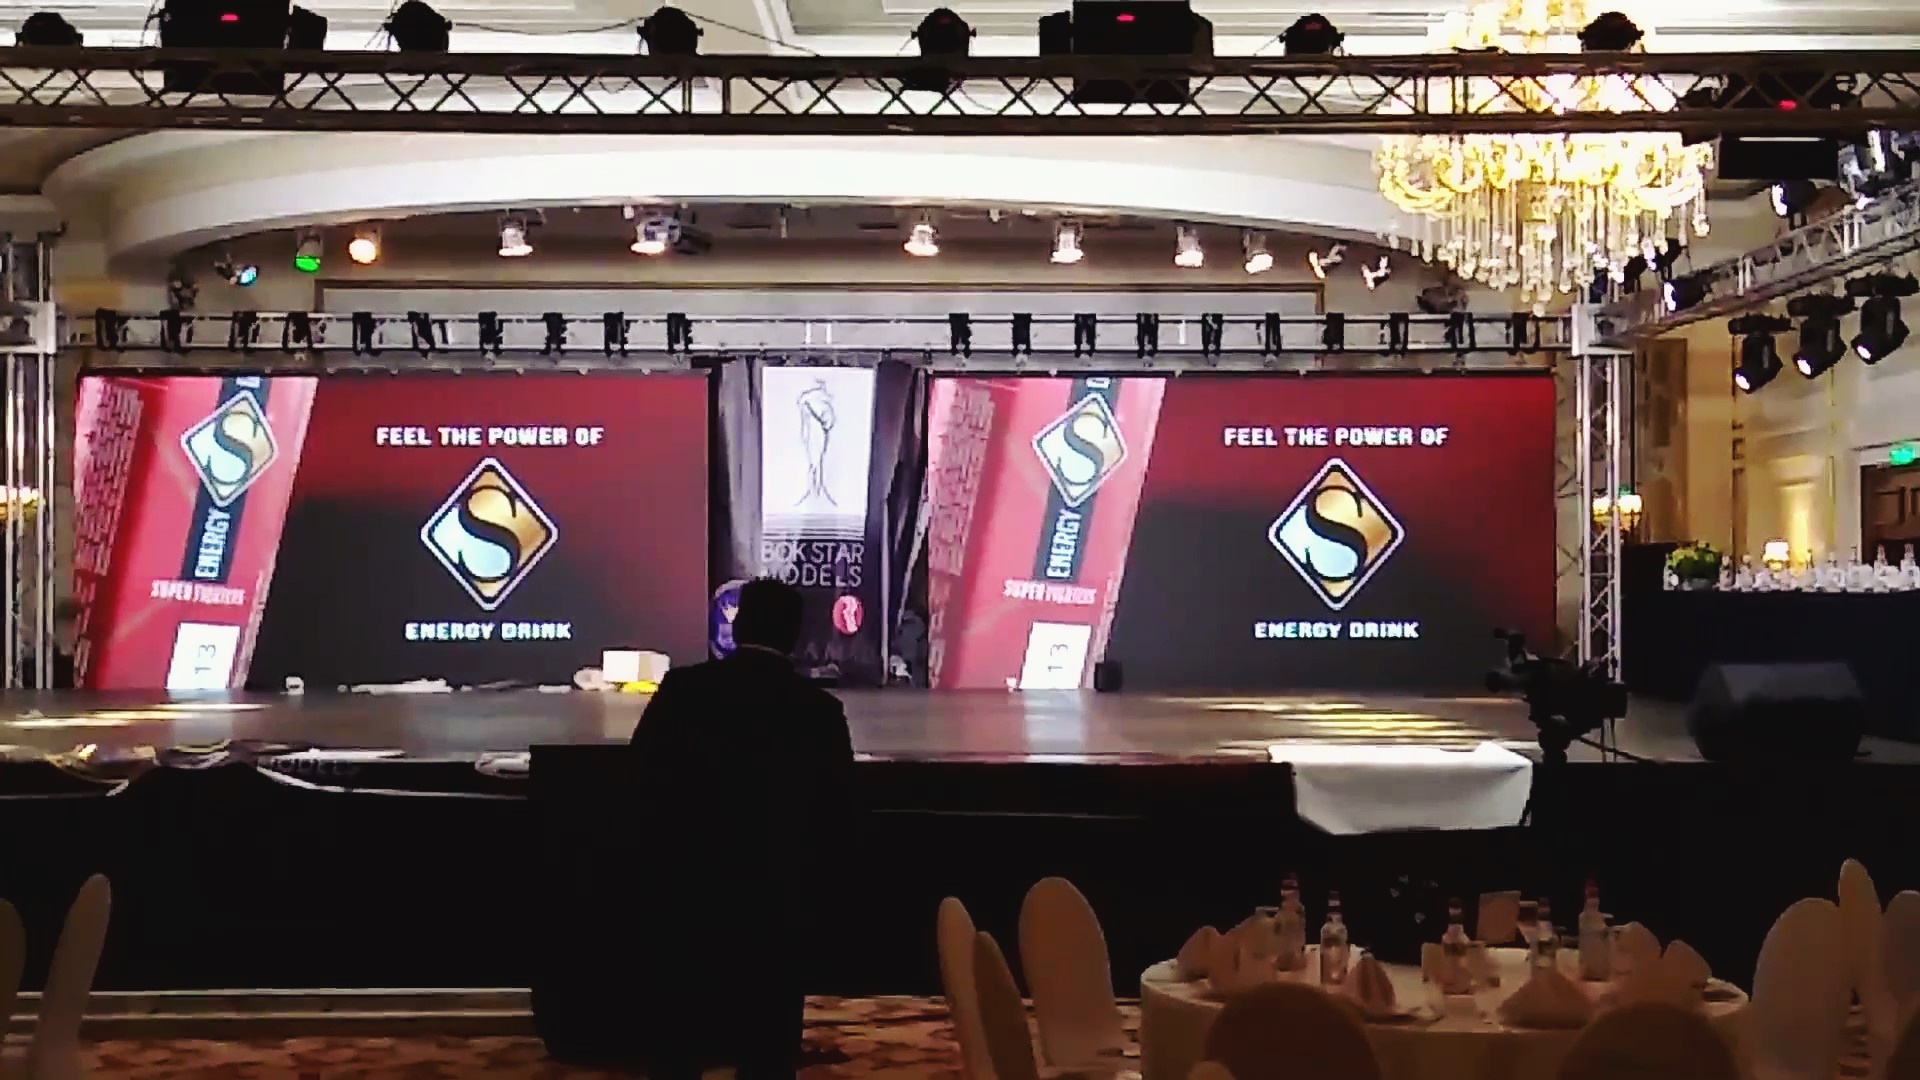 LED screen special event